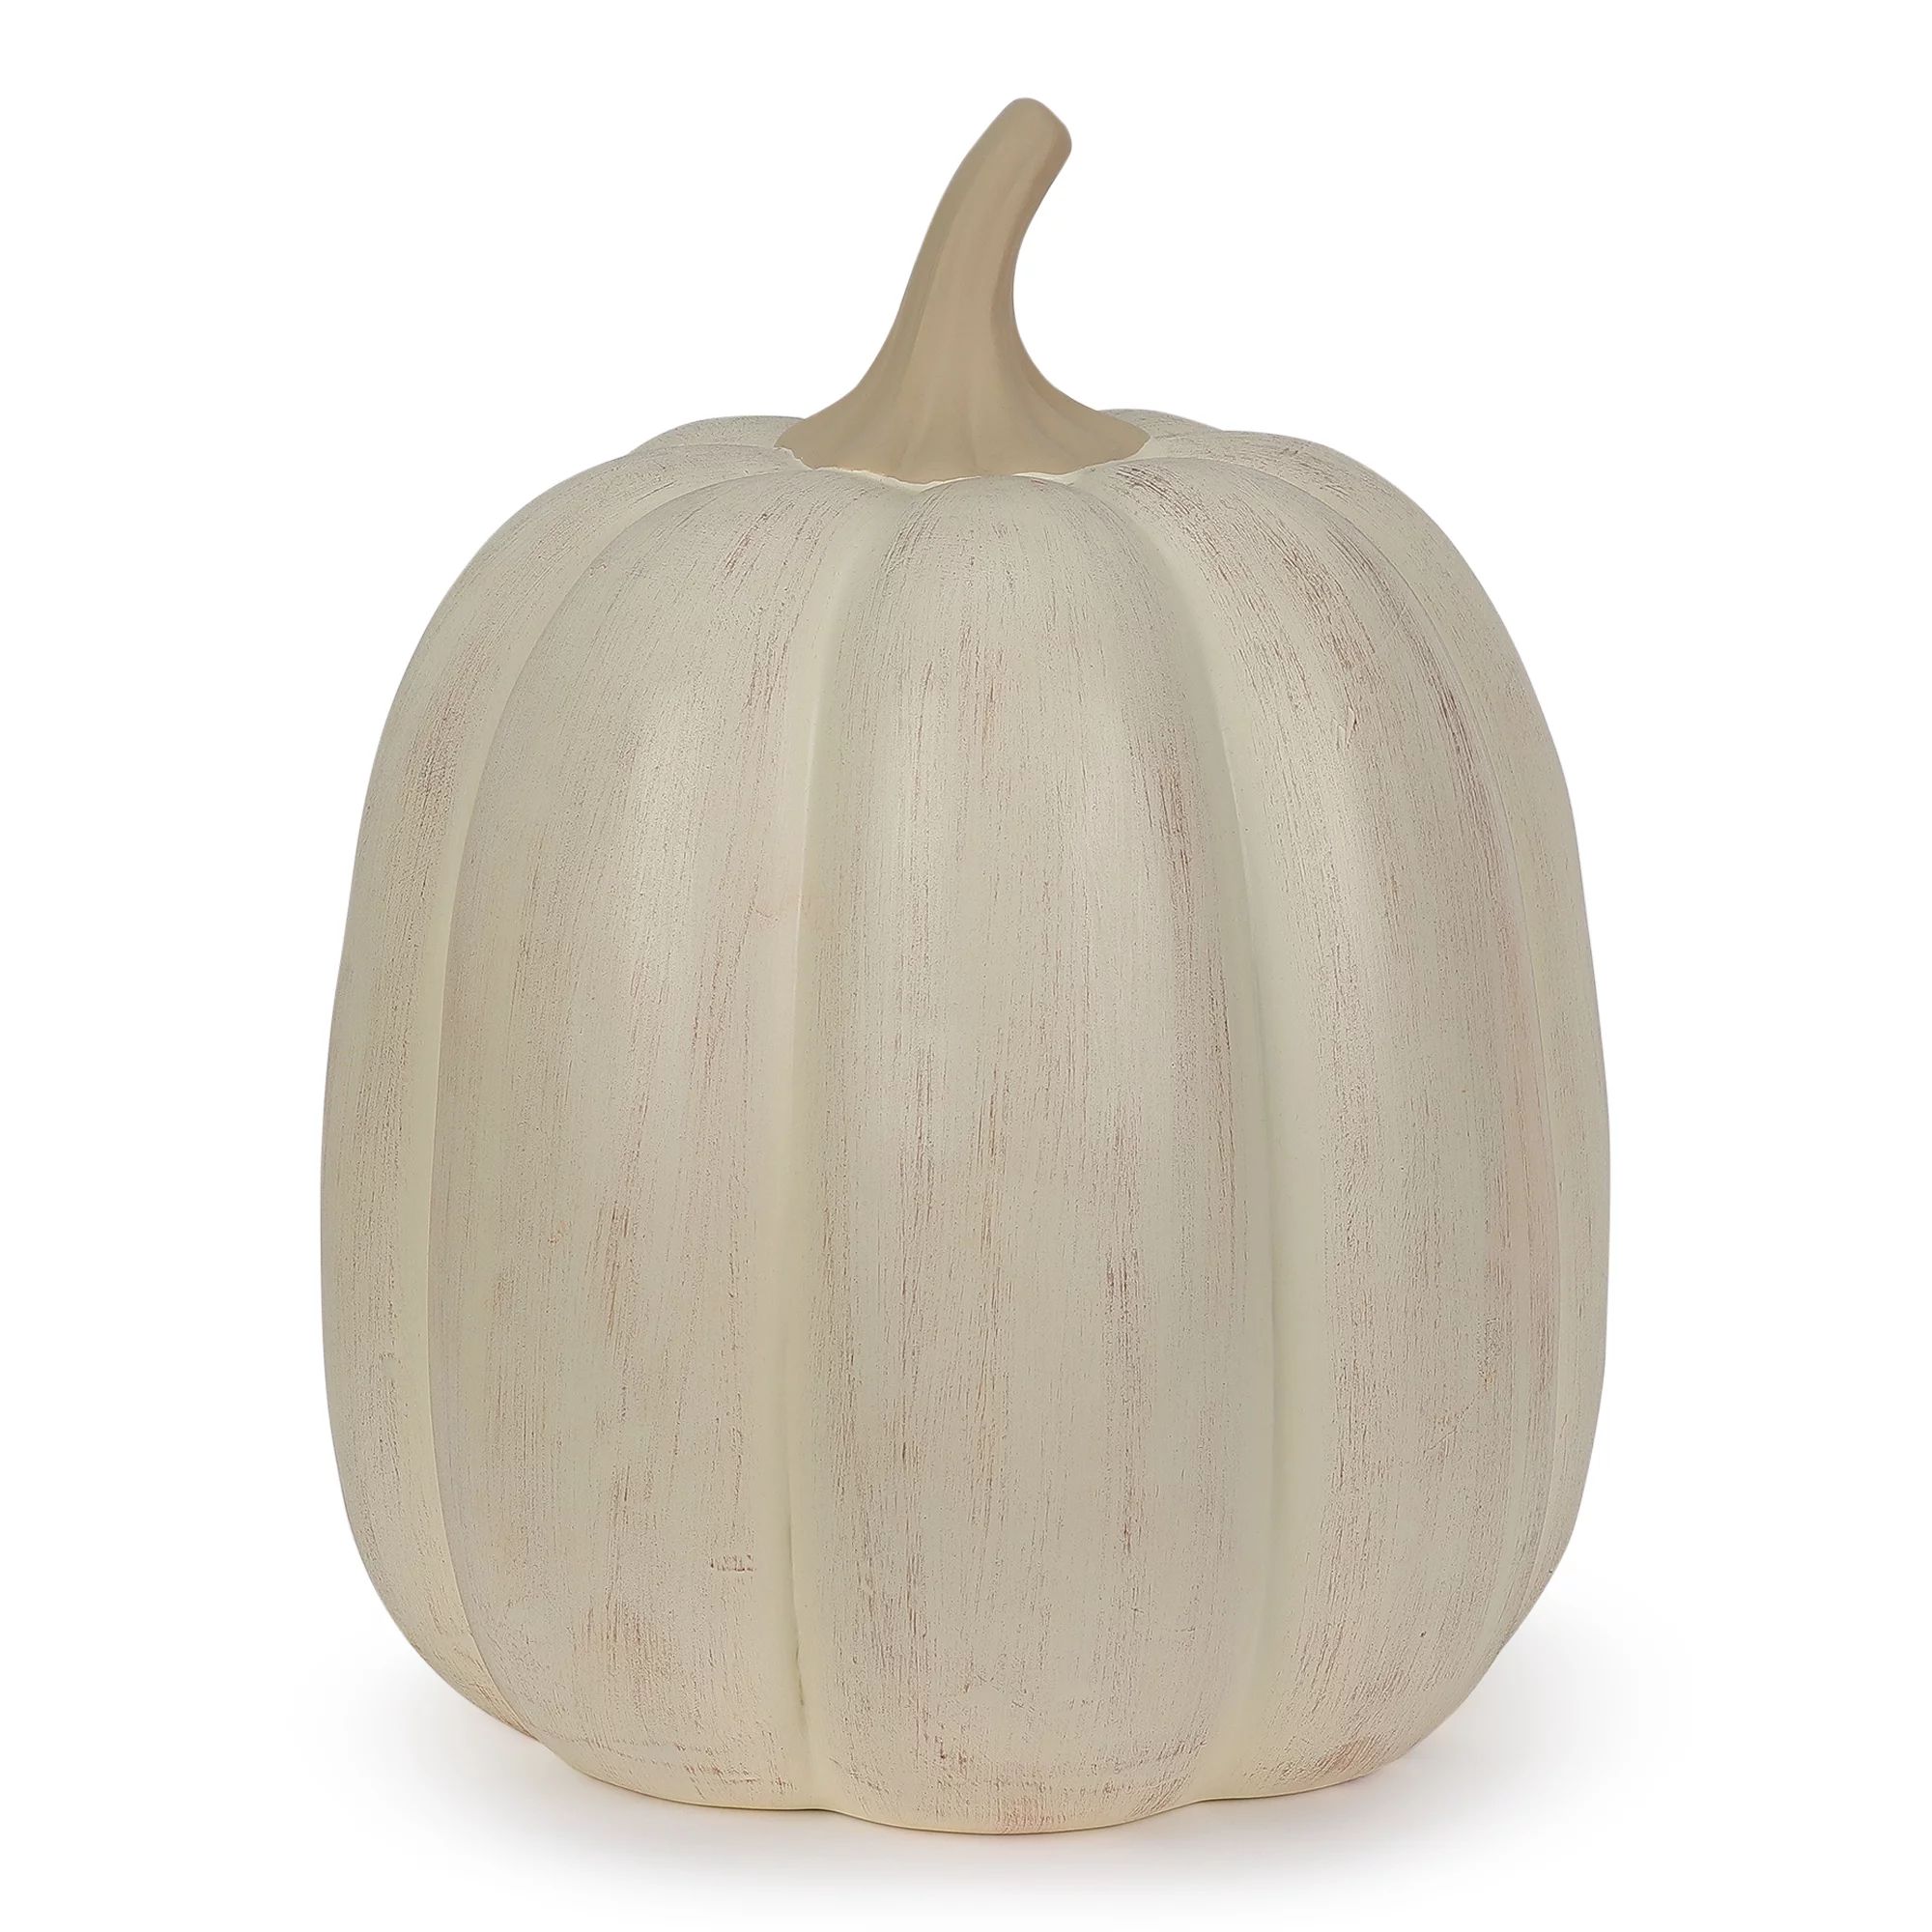 Harvest Clay Cream Pumpkin Tabletop Decor, 12.5 in, by Way To Celebrate | Walmart (US)